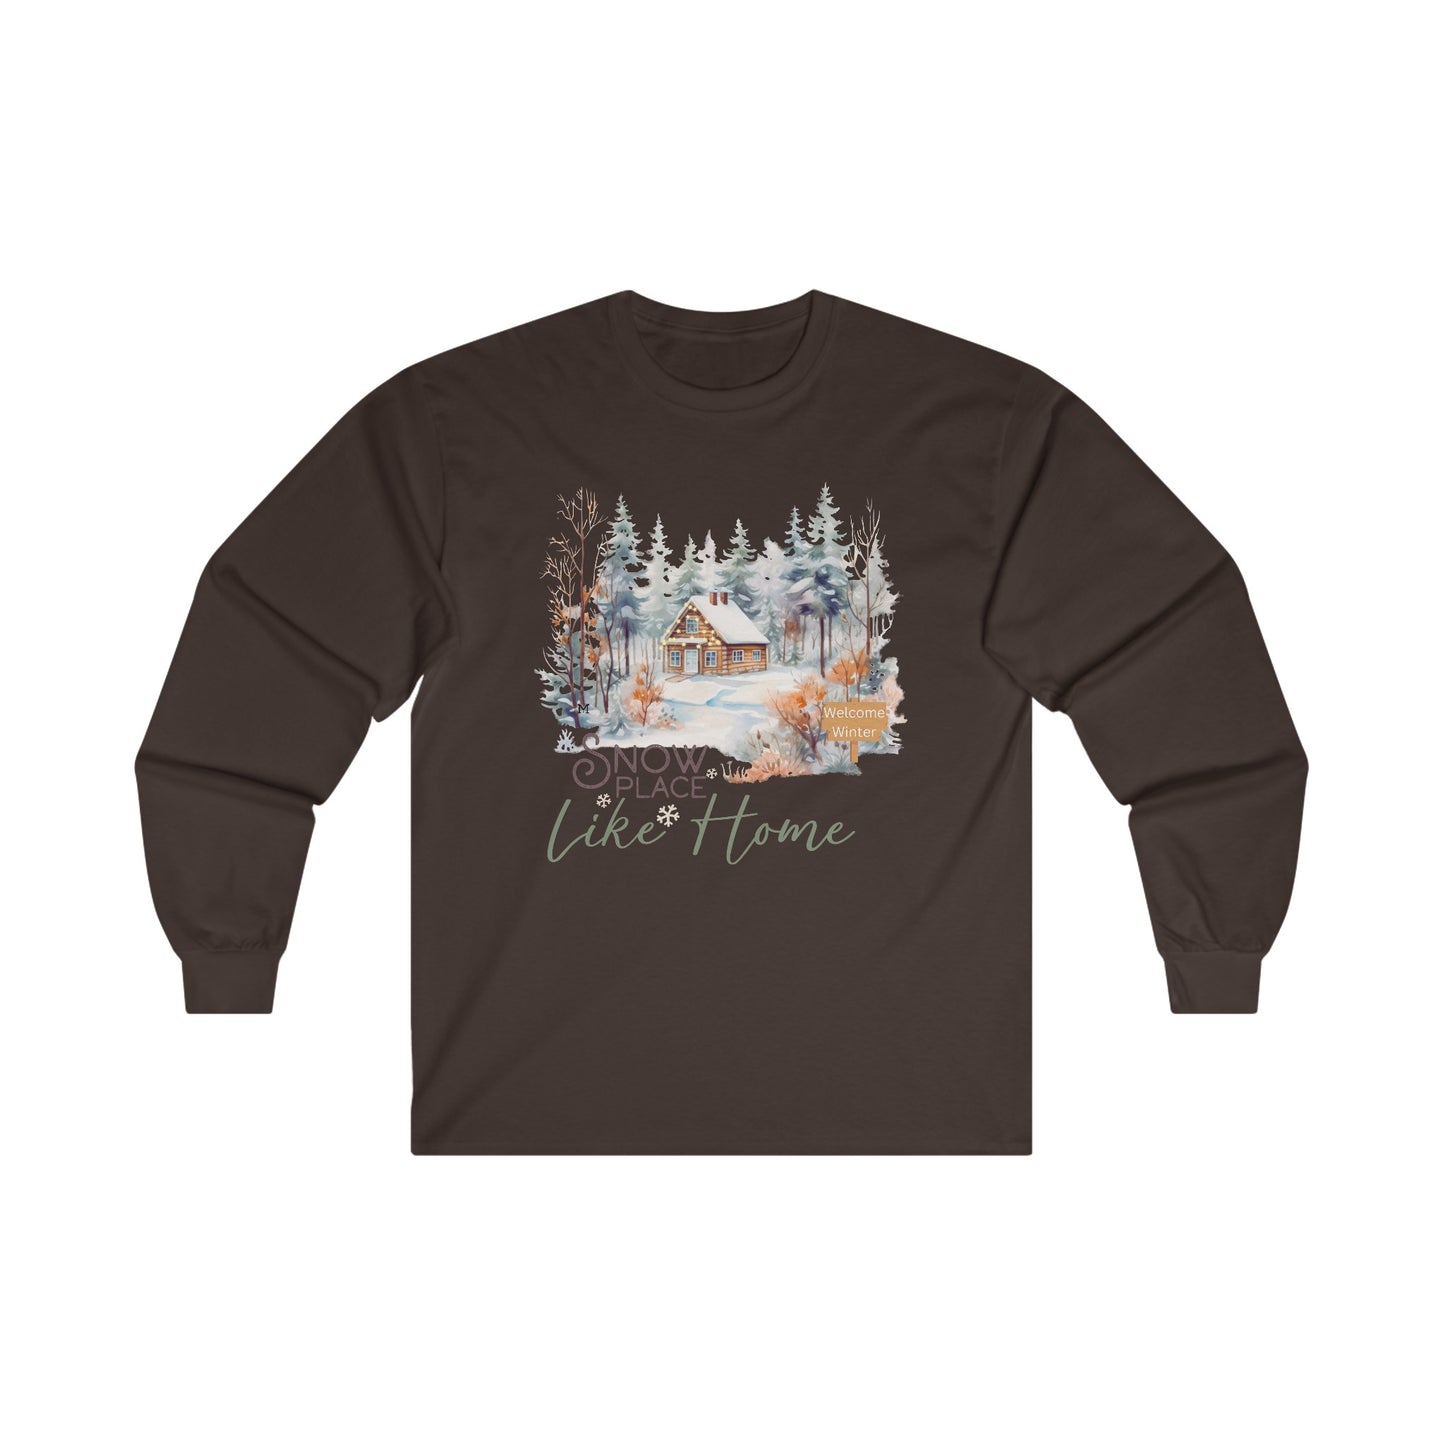 Snow Place Like Home Country Cabin Snow Trees Welcome Winter by MII Designs Long Sleeve T-Shirt Gildan 2400 Ultra Cotton Tee